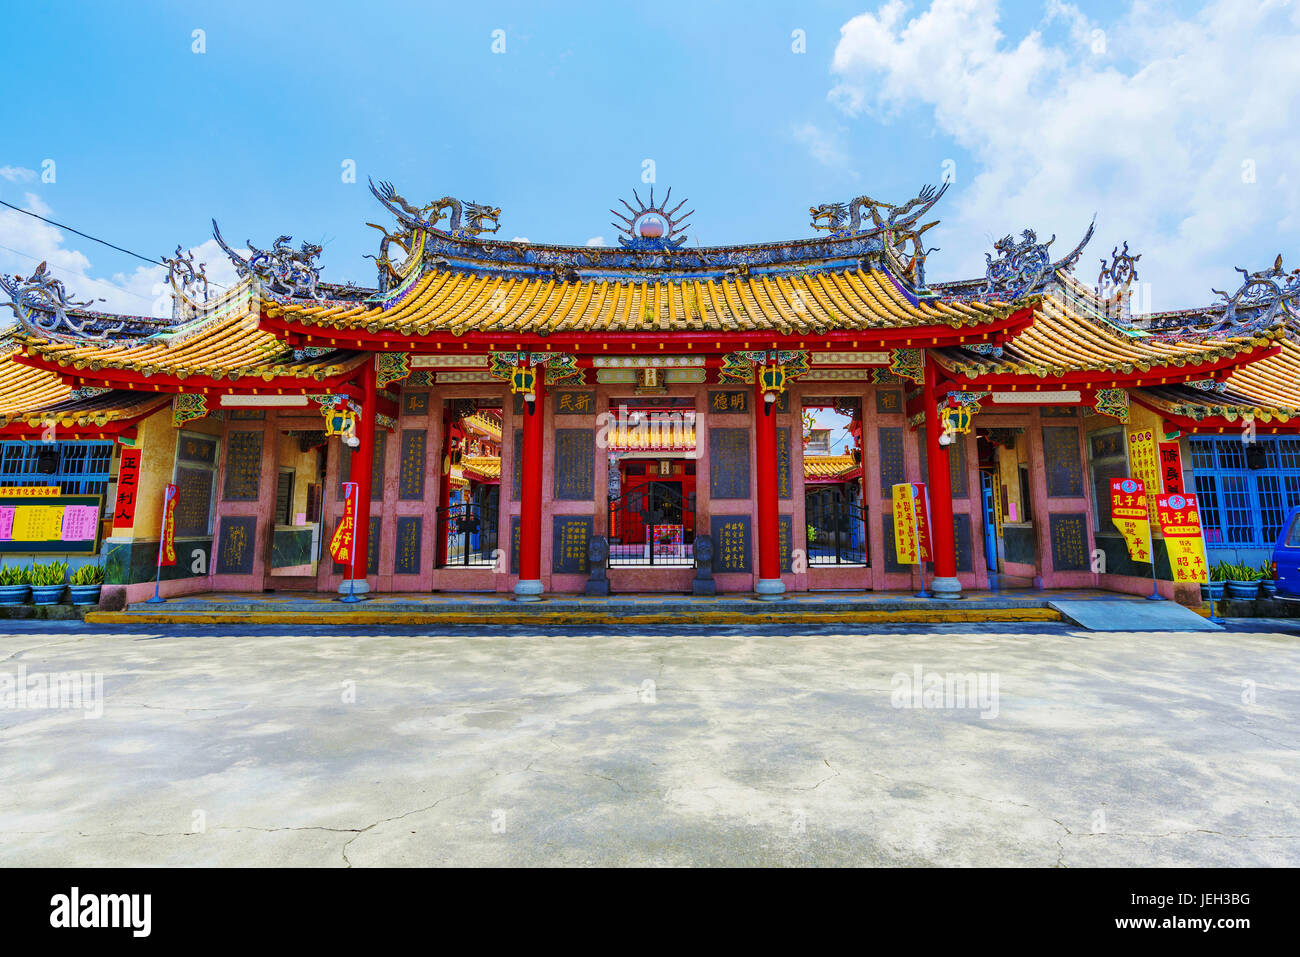 PULI, TAIWAN - MAY 07: This is the exterior architecture of a traditional Confucius temple which is a popular landmark for local Taiwanese people on M Stock Photo